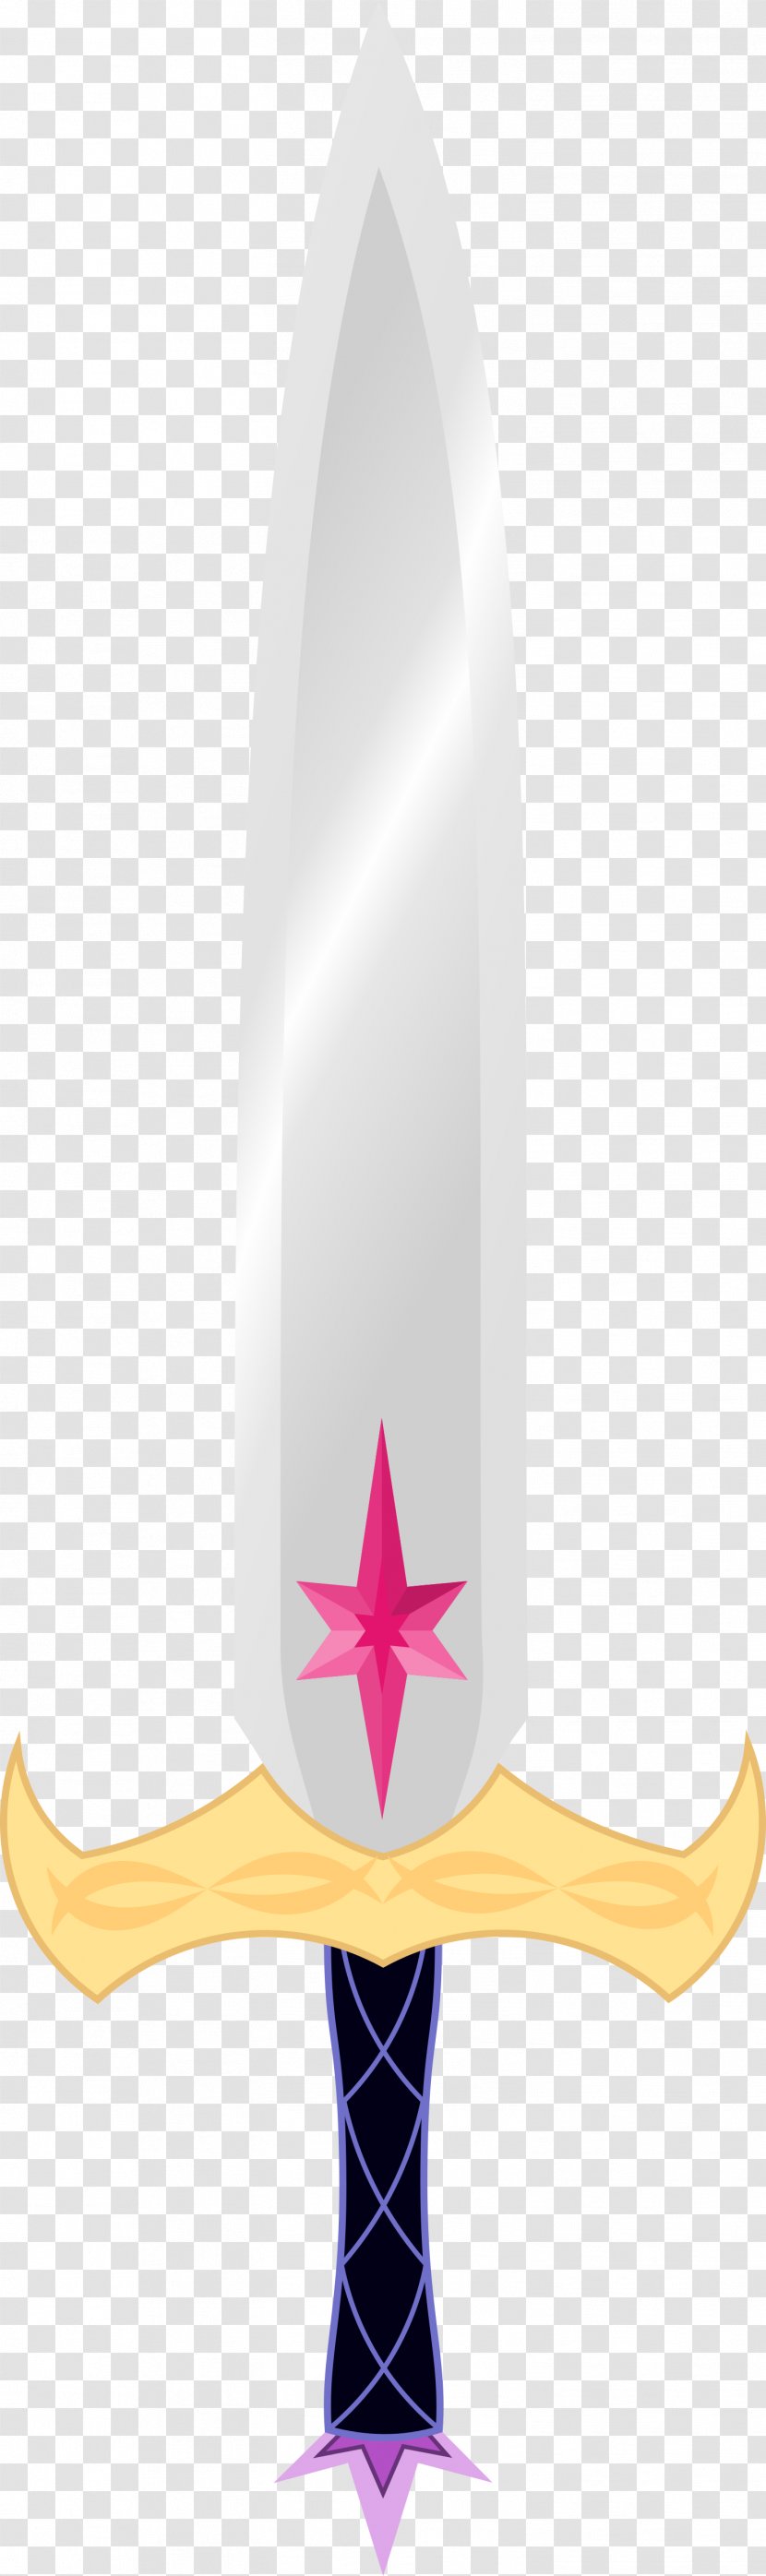 My Little Pony: Friendship Is Magic Weapon Blade - Heart - Sword Transparent PNG